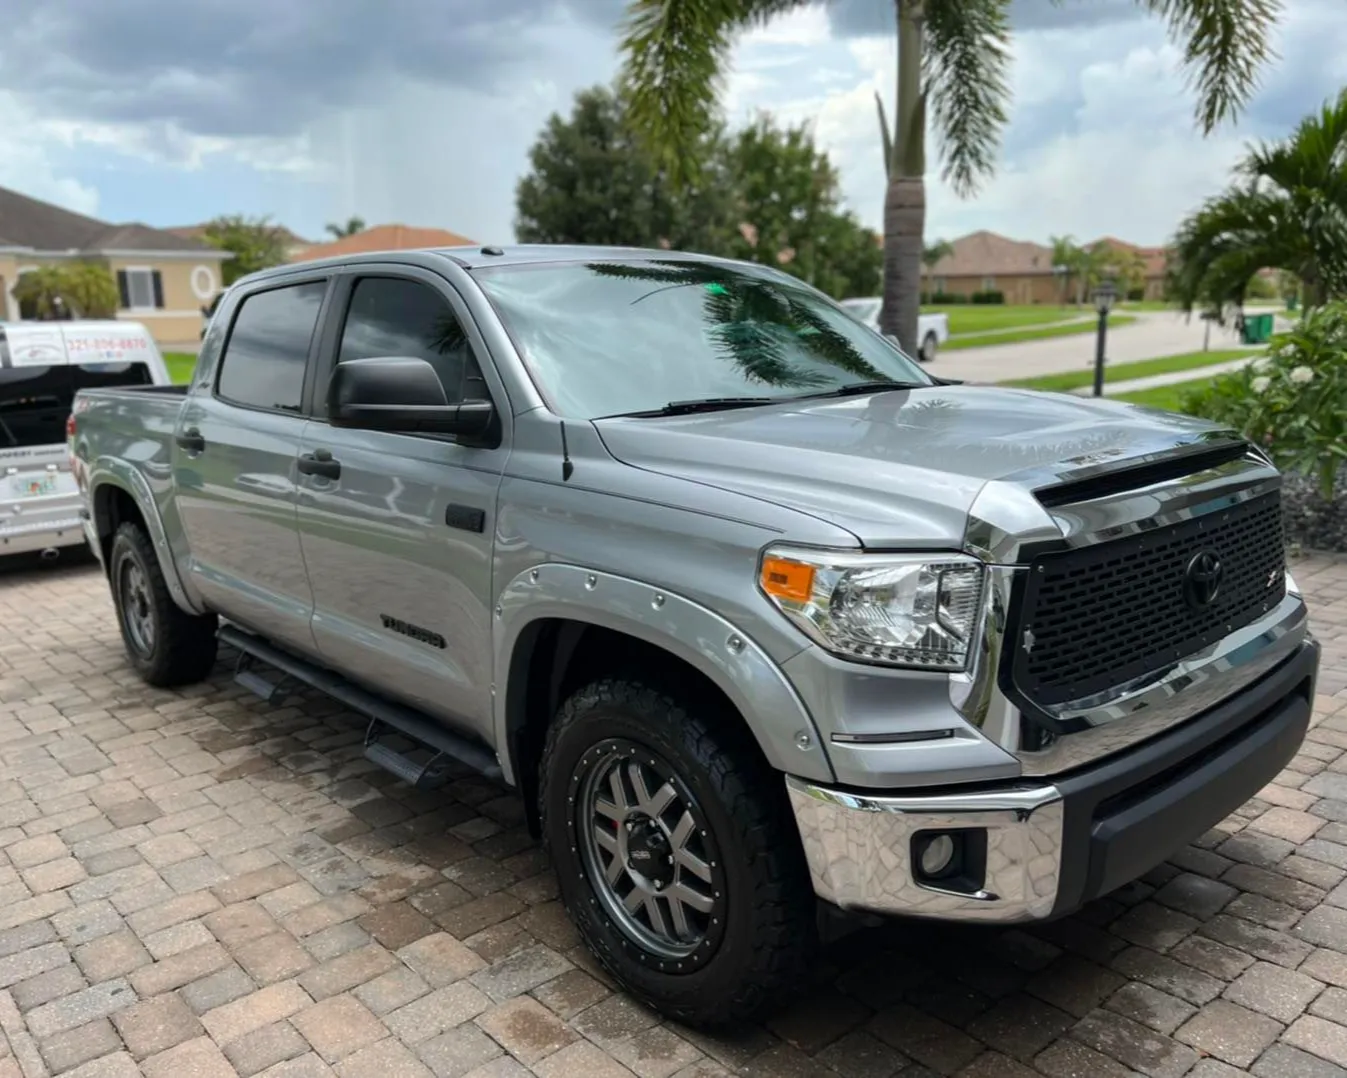 Exterior Detailing for Picture Perfect Detailing LLC in Brevard County, FL